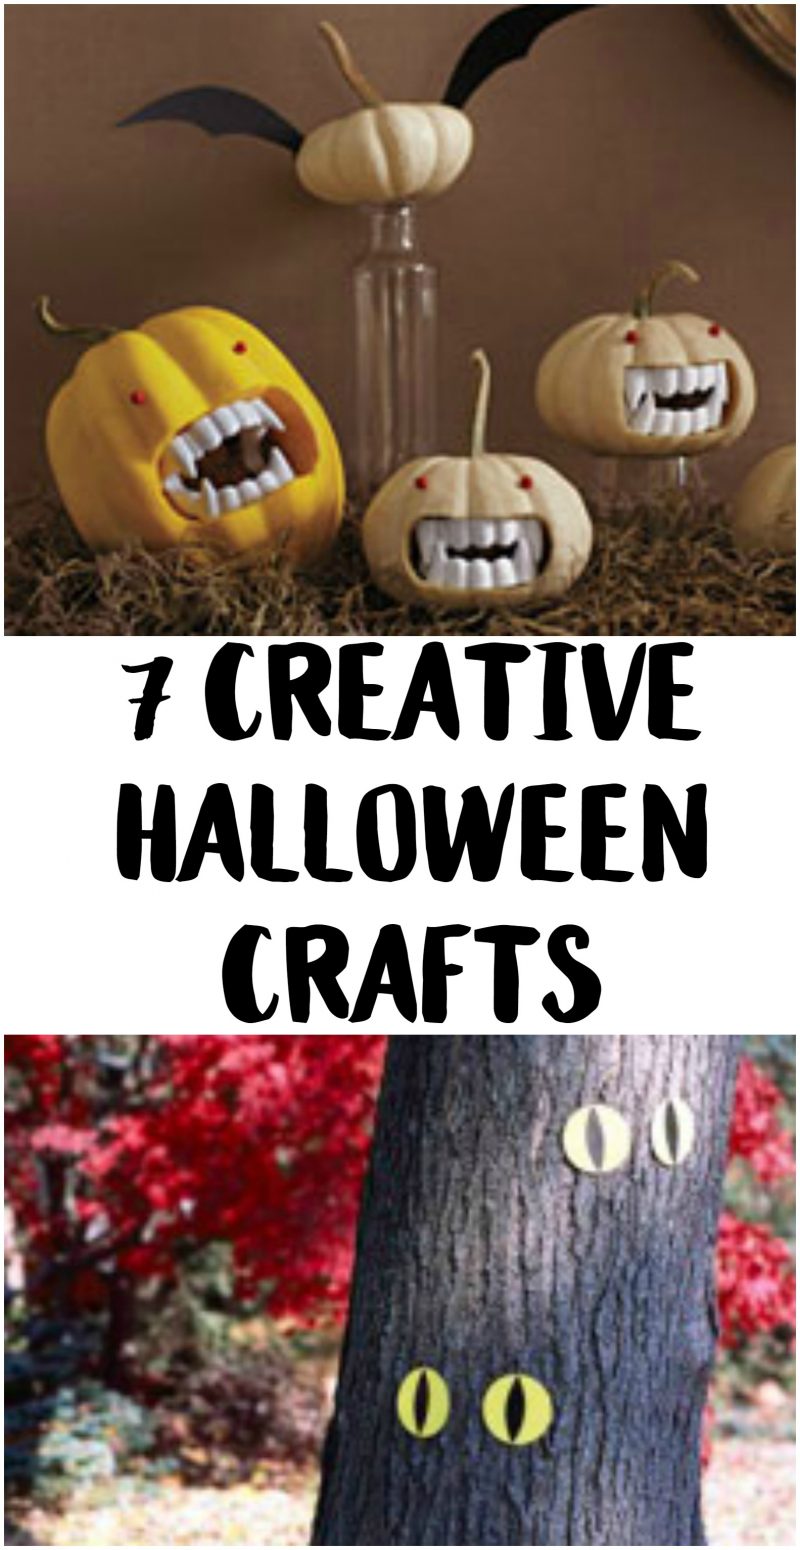 7-creative-halloween-crafts-for-adults